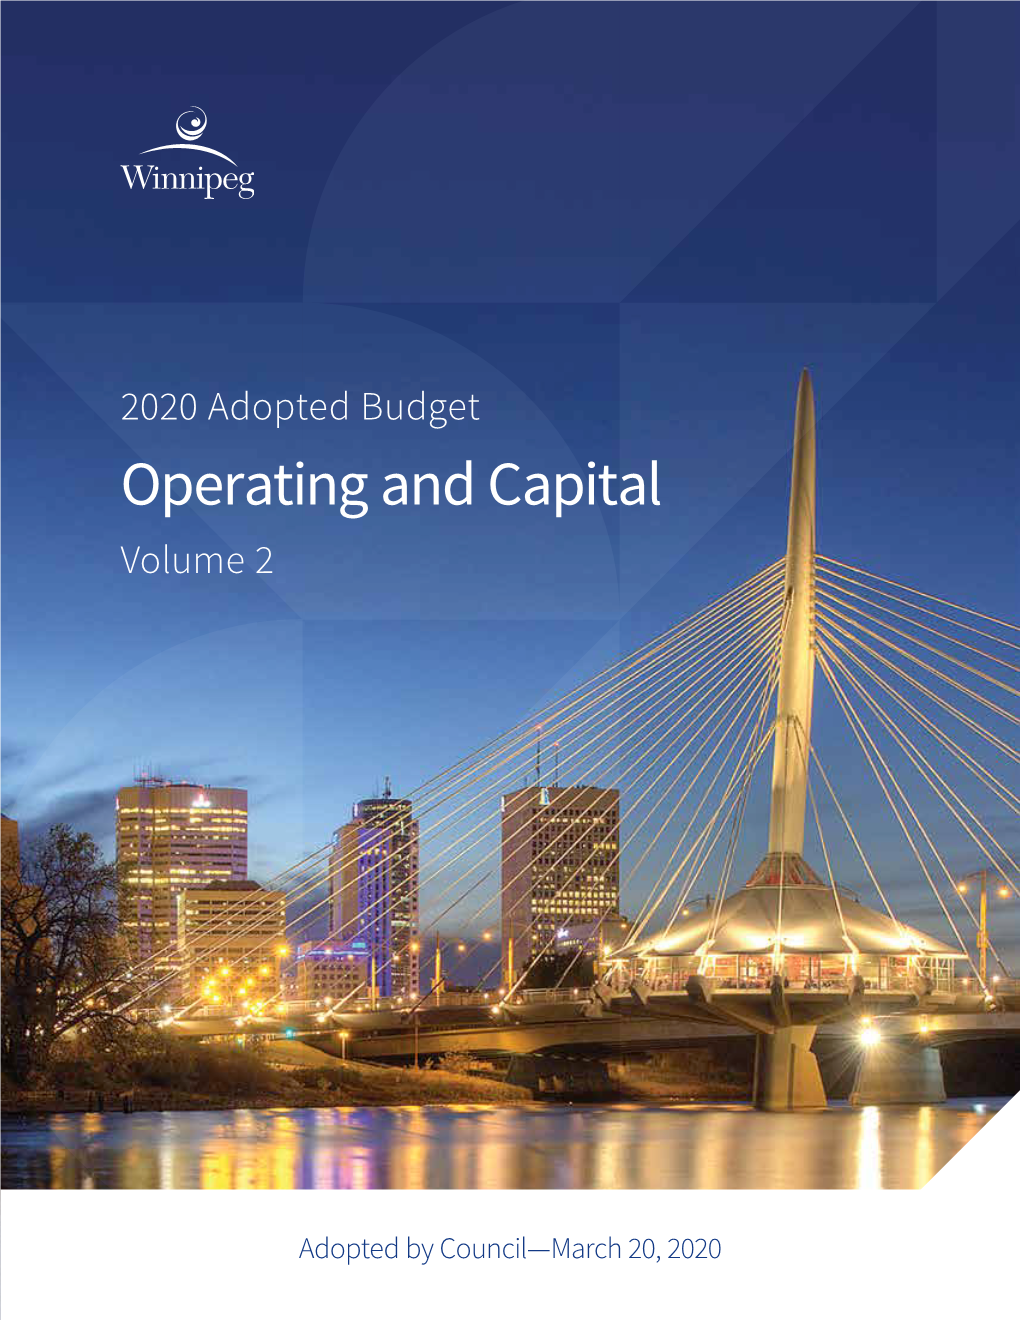 2020 Adopted Budget Operating and Capital Volume 2